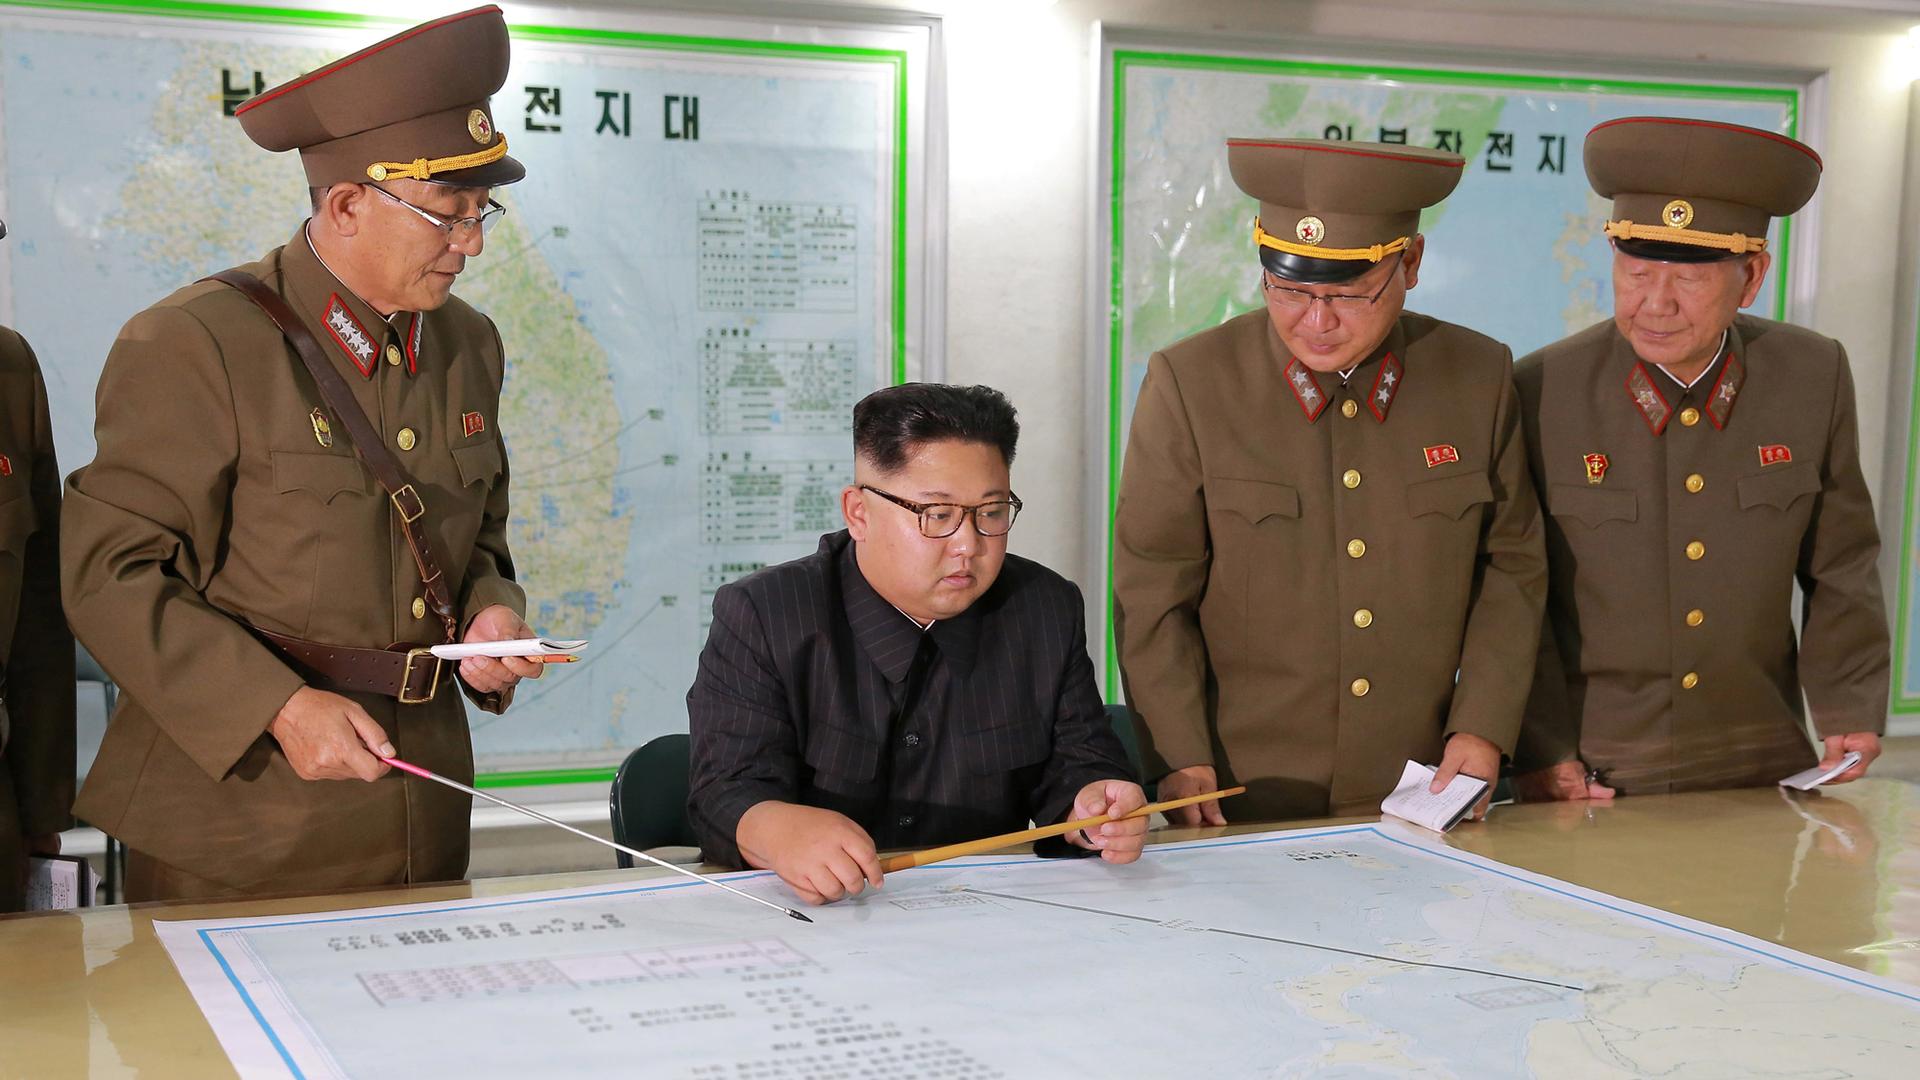 North Korean leader Kim Jong-un with military officials in an unknown location in an undated photo released by North Korea's Korean Central News Agency on August 15, 2017.